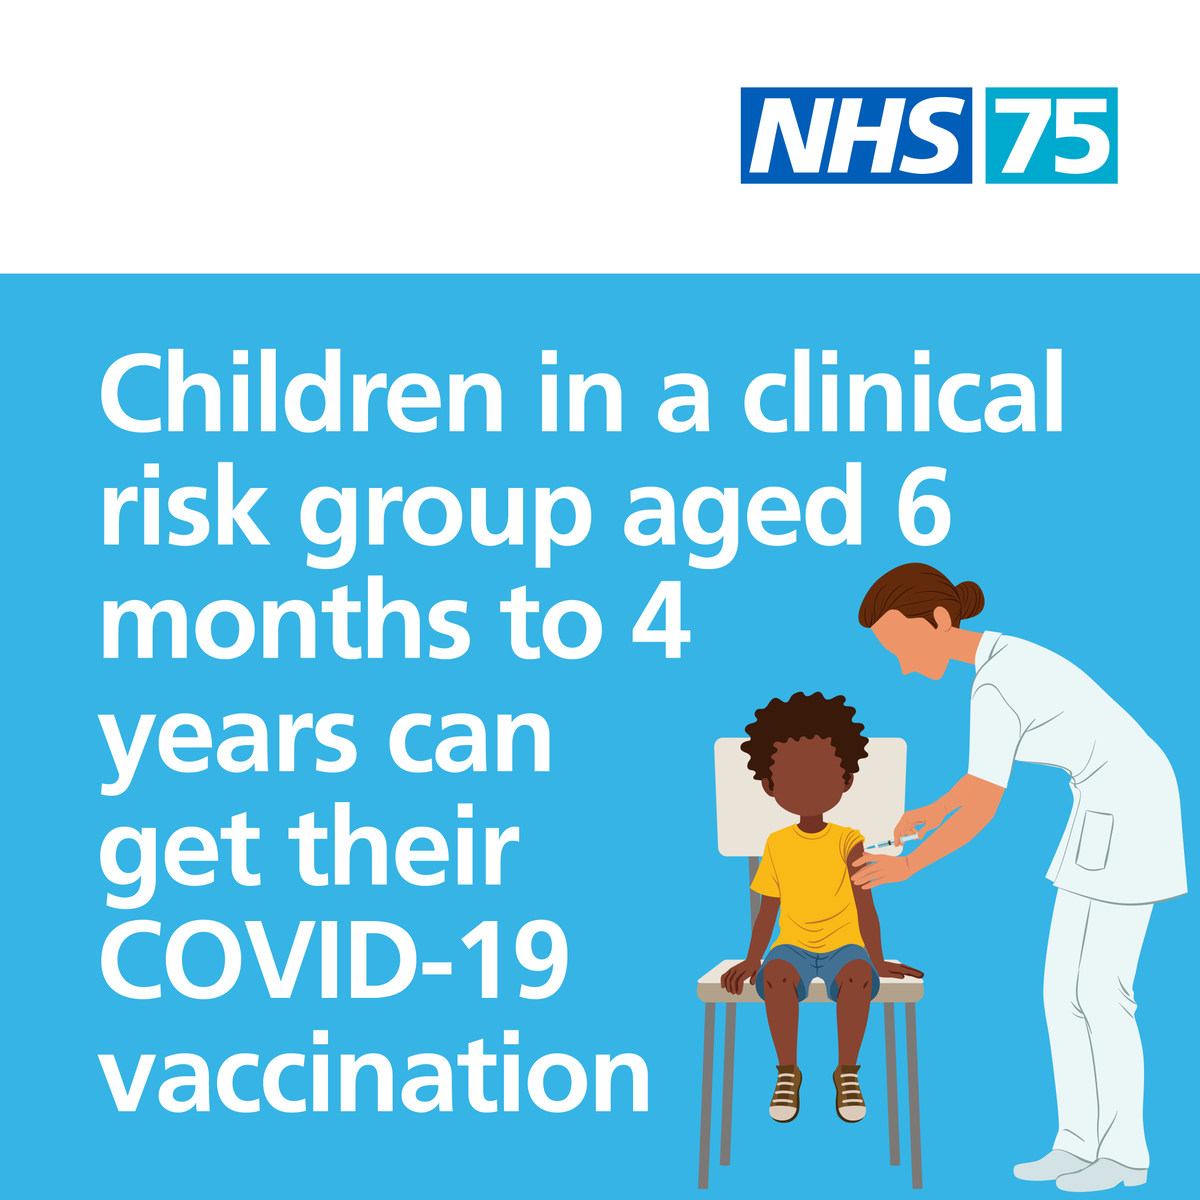 This spring, the NHS is offering #COVID-19 vaccinations to all under-fives who are in clinical risk groups You do not have to be registered with a GP to be entitled to this vaccination selondonics.org/icb/your-healt…